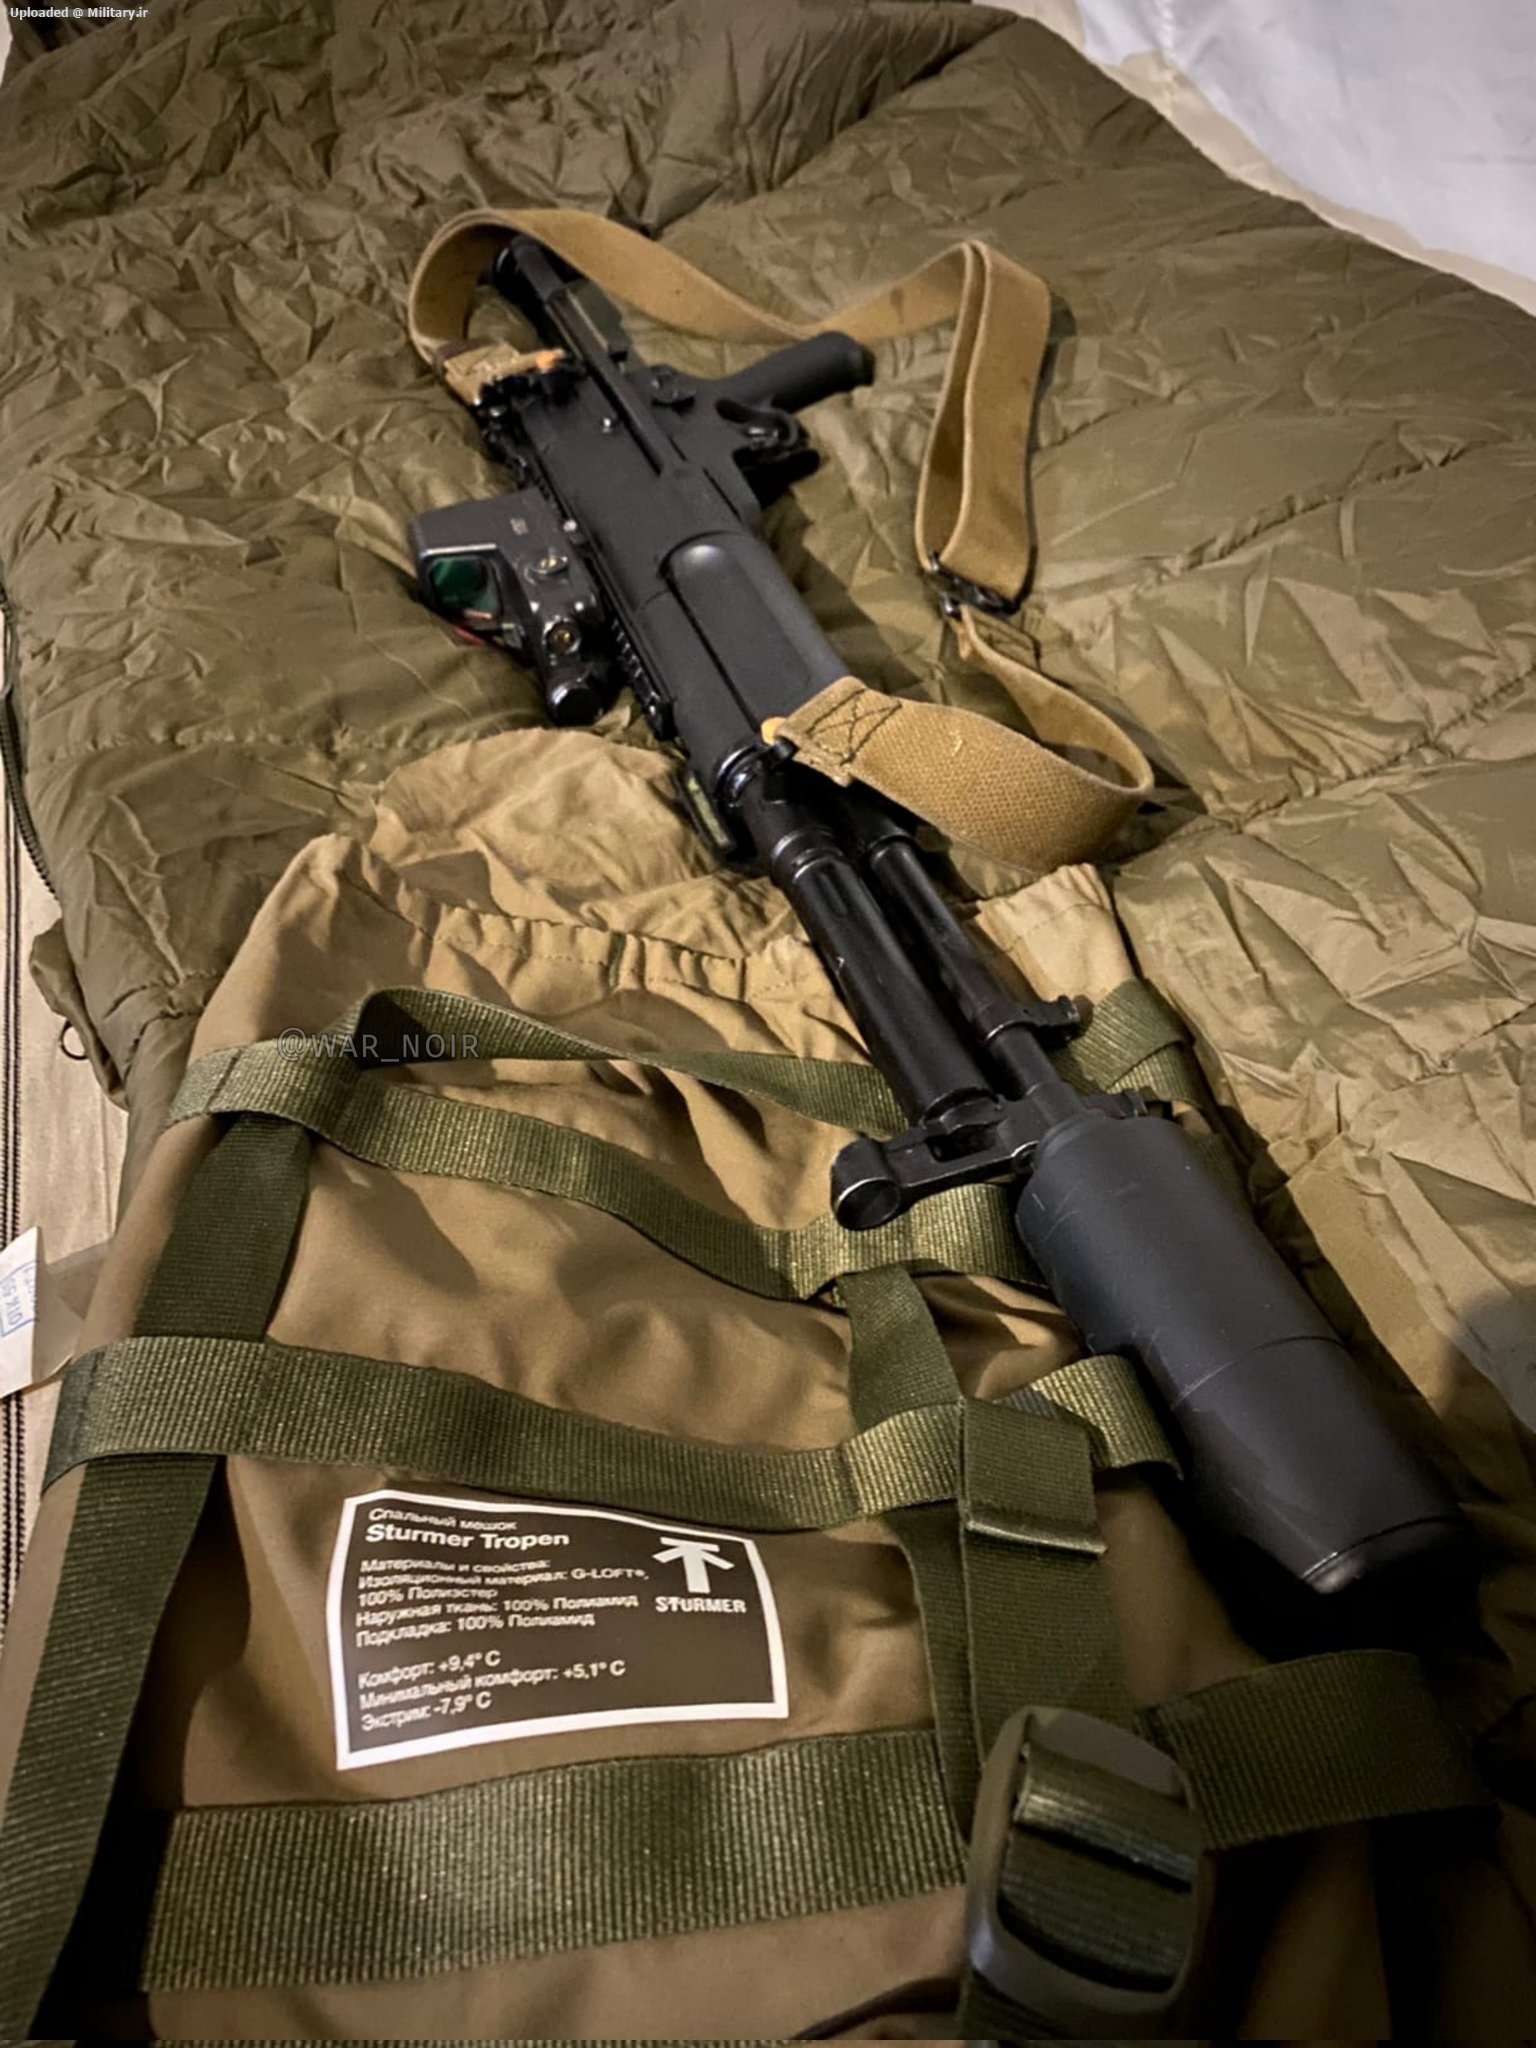 The_rifle_is_chambered_in_5_45x39mm_and_